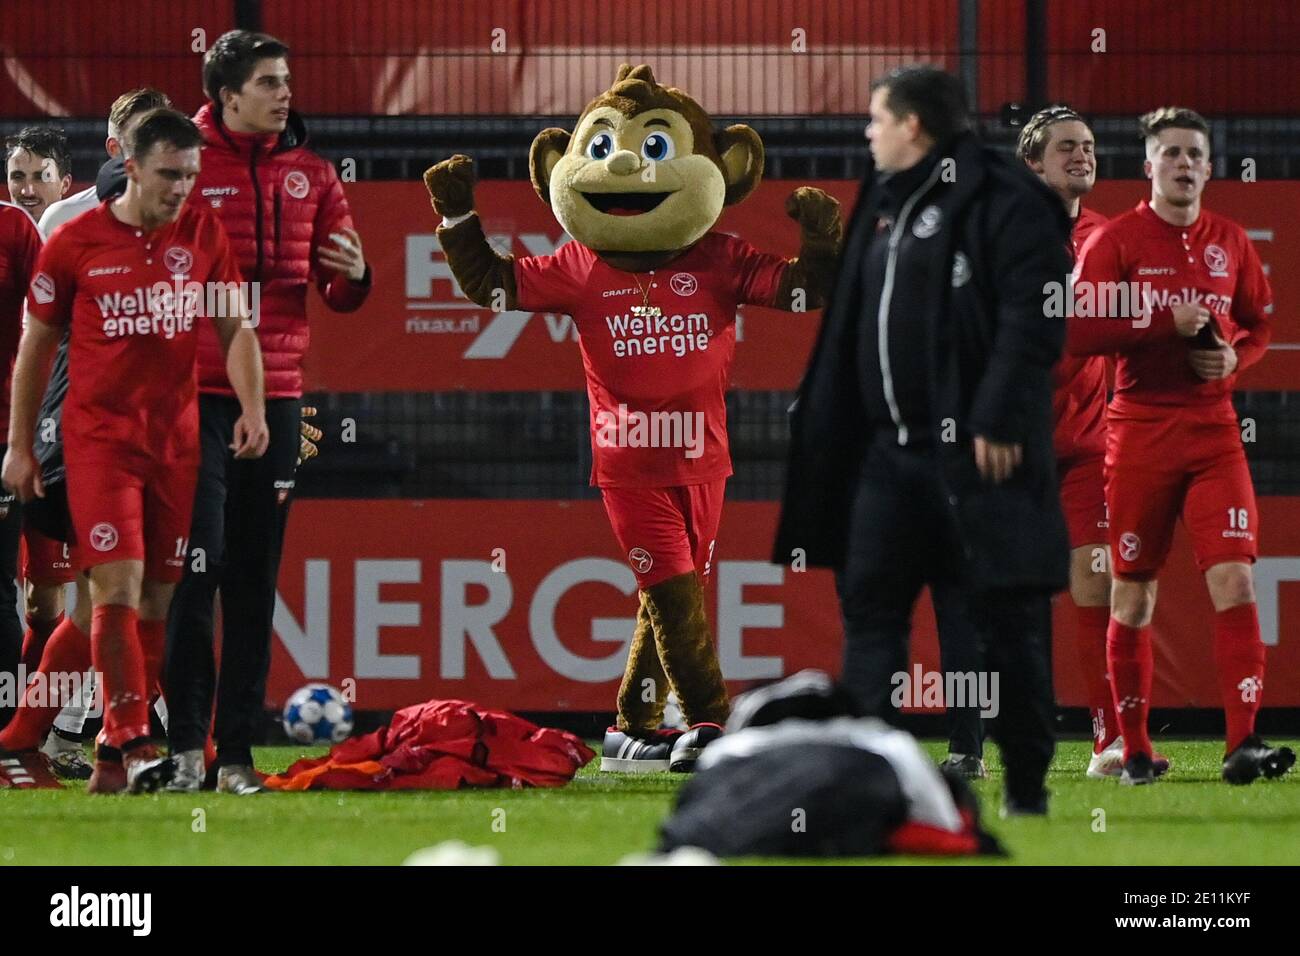 ALMERE, NETHERLANDS - JANUARY 2: L-R: mascot of Almere City FC during the  Dutch Keukenkampioendivisie match between Almere City FC and De Graafschap  a Stock Photo - Alamy